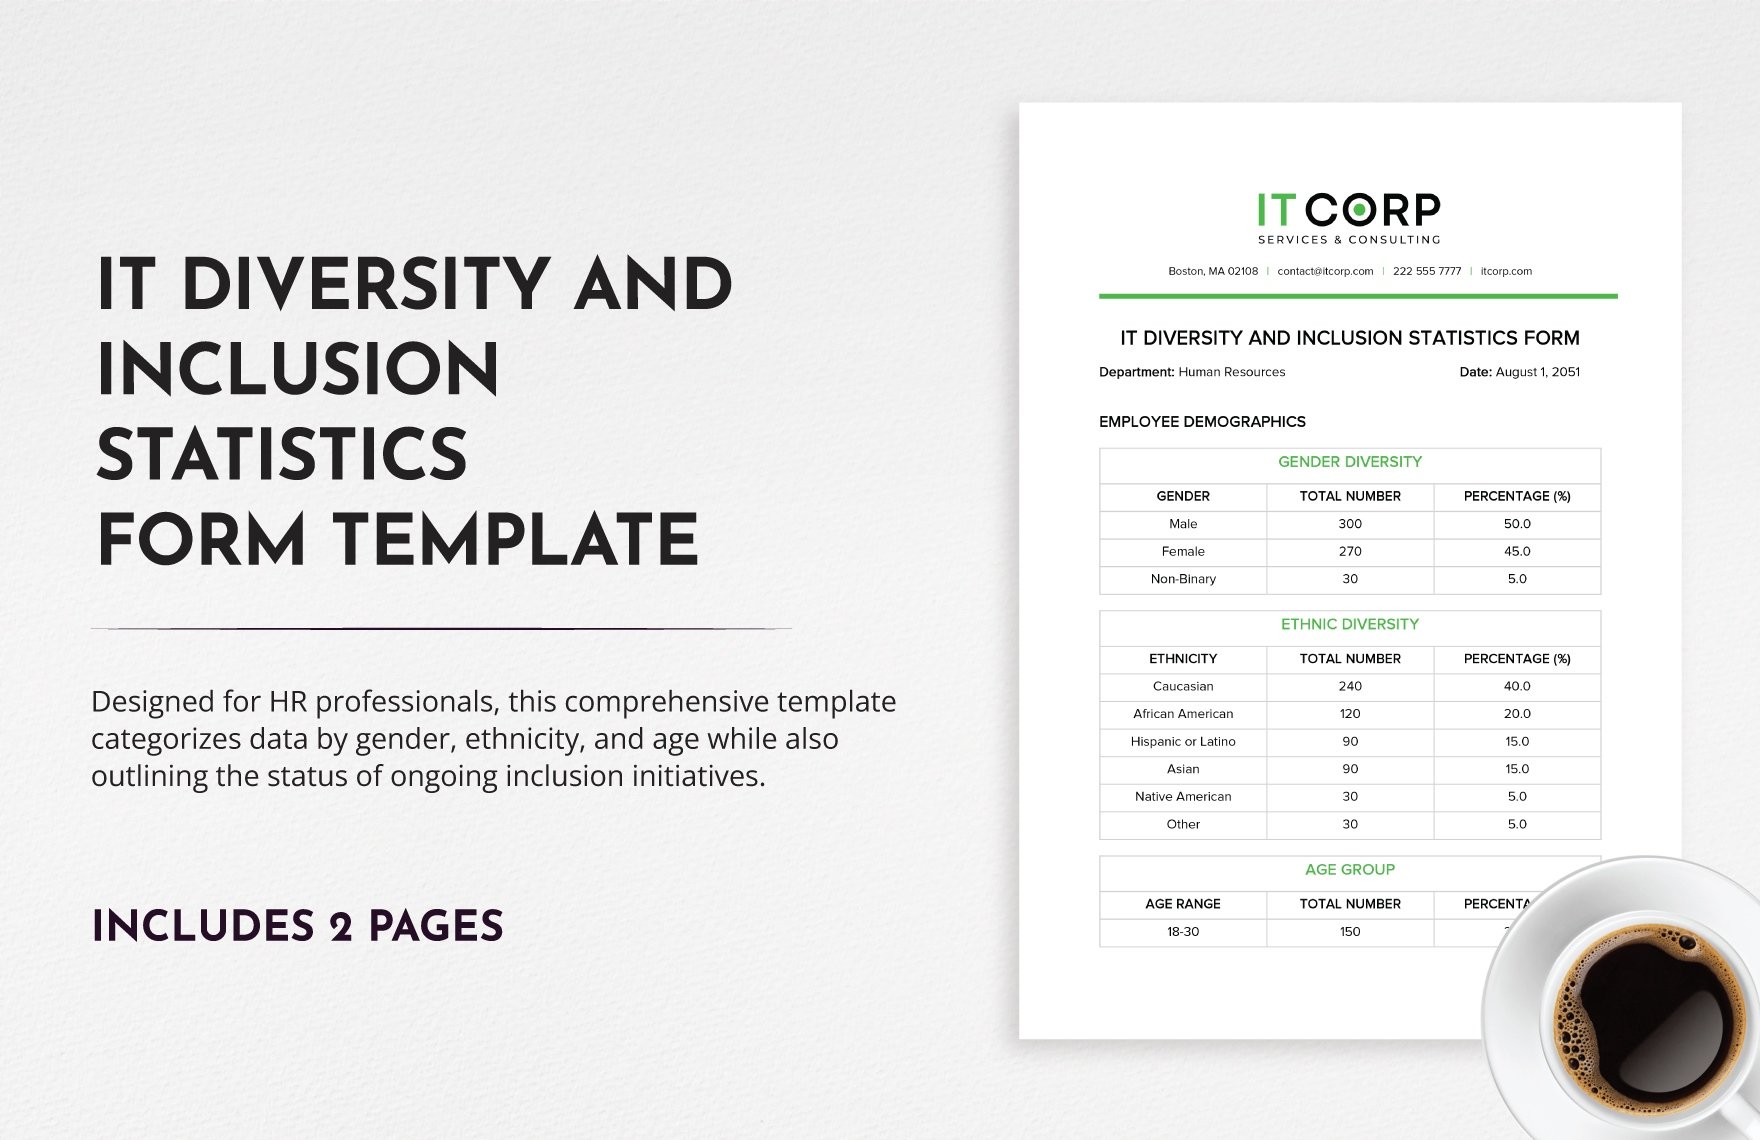 IT Diversity and Inclusion Statistics Form Template